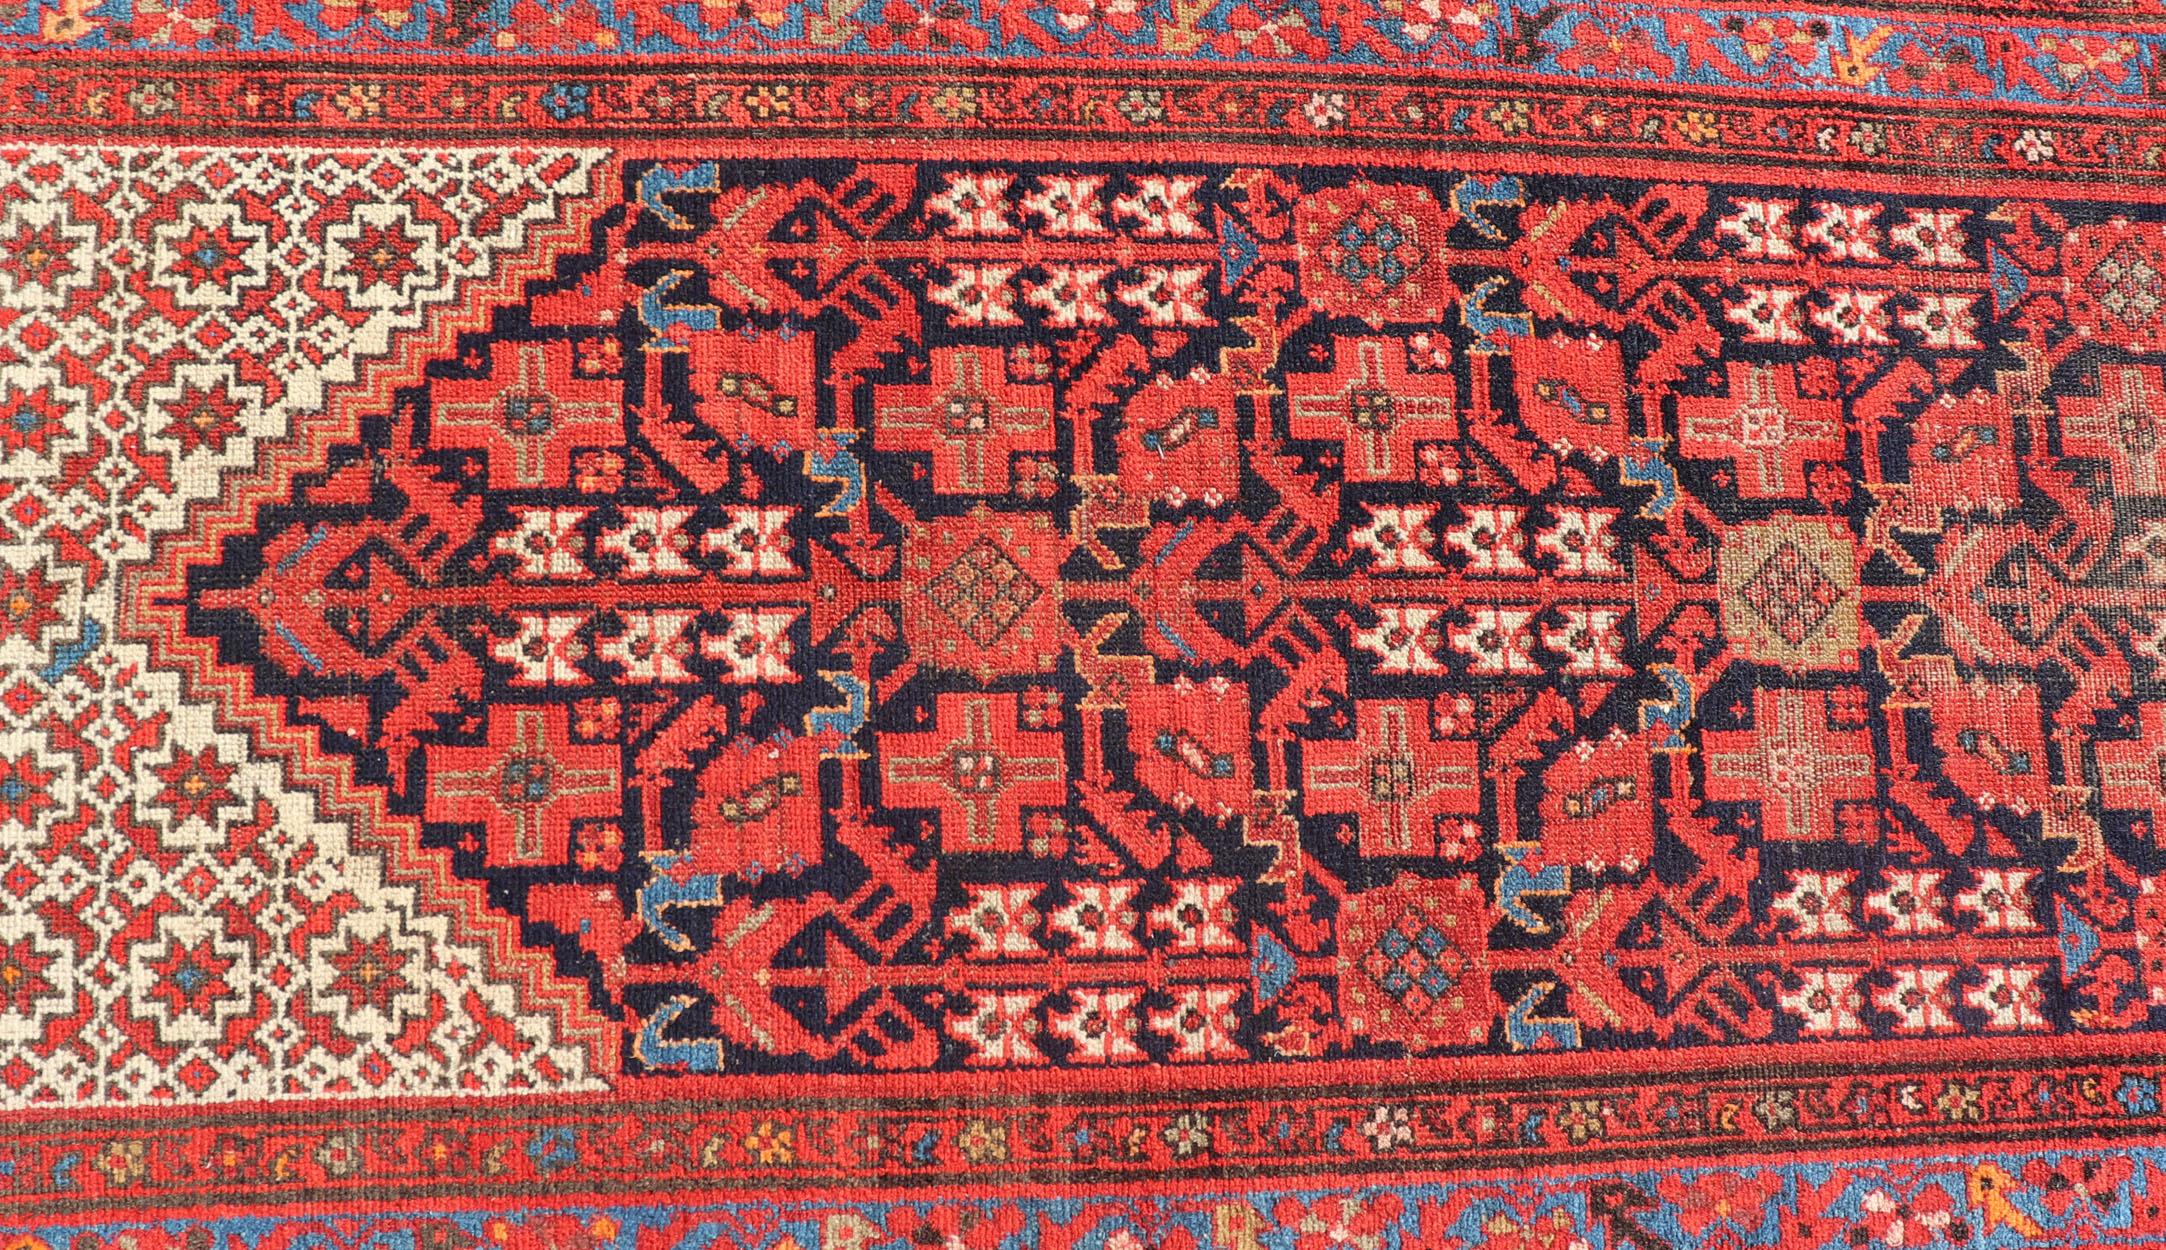 This gorgeous antique Malayer Runner features a stunning all-over geometric Herati design set upon a Dark Blue background. The patterns are surrounded by a variety of motifs. The entirety of the piece is enclosed within a complementary, multi-tiered